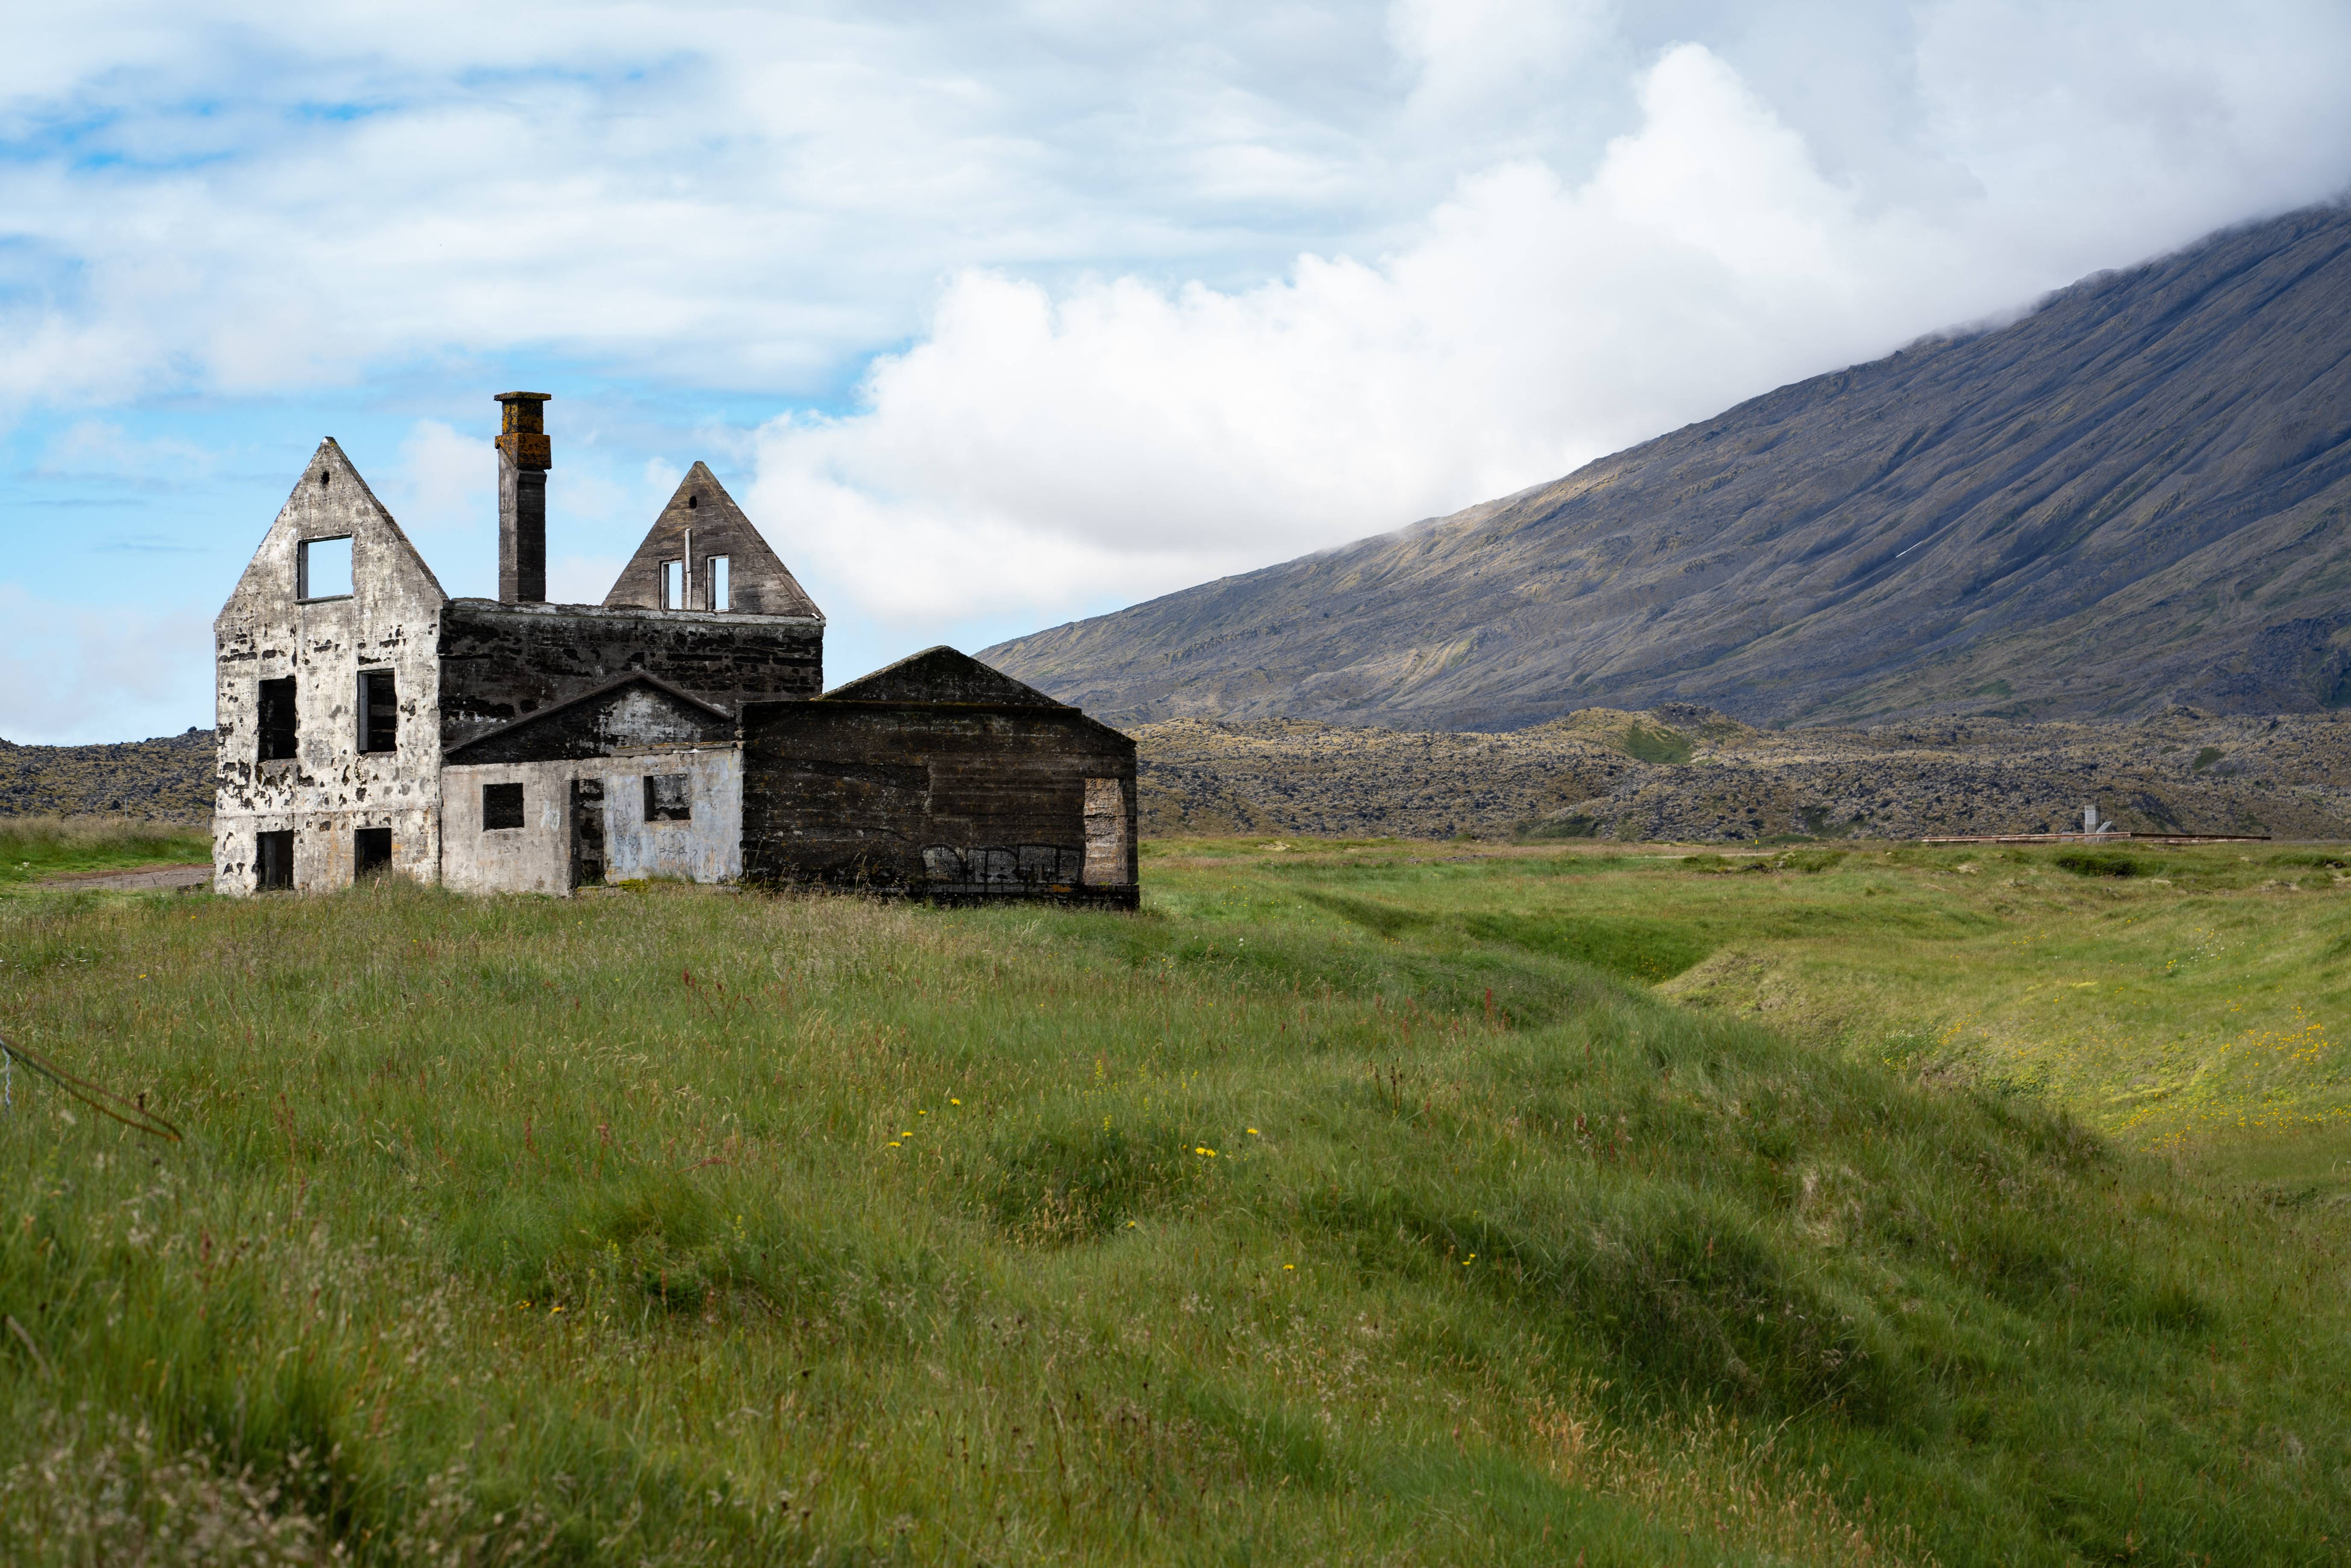 old-run-down-house-in-iceland-on-a-beautiful-summer-day-clear-blue-skies-and-deep-green-grass-around-it-and-a-big-steep-mountain-behind-it